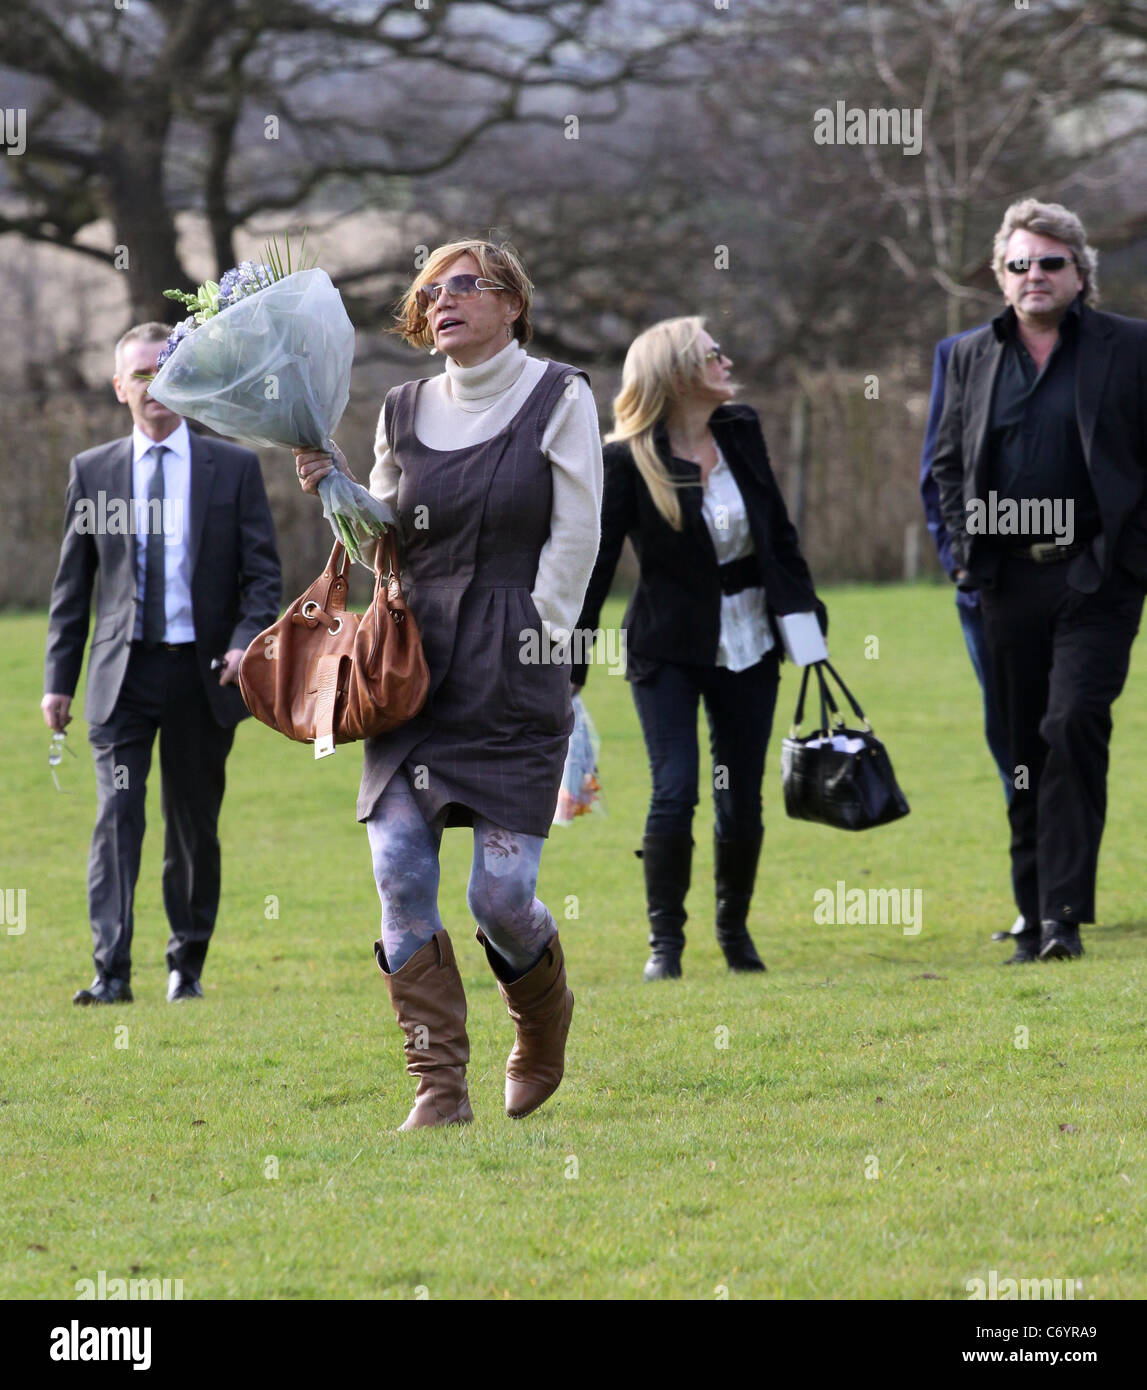 Jade Goody's mum Jackiey Budden visits Jade's grave with family and friends after Jade's first anniversary memorial service. Stock Photo